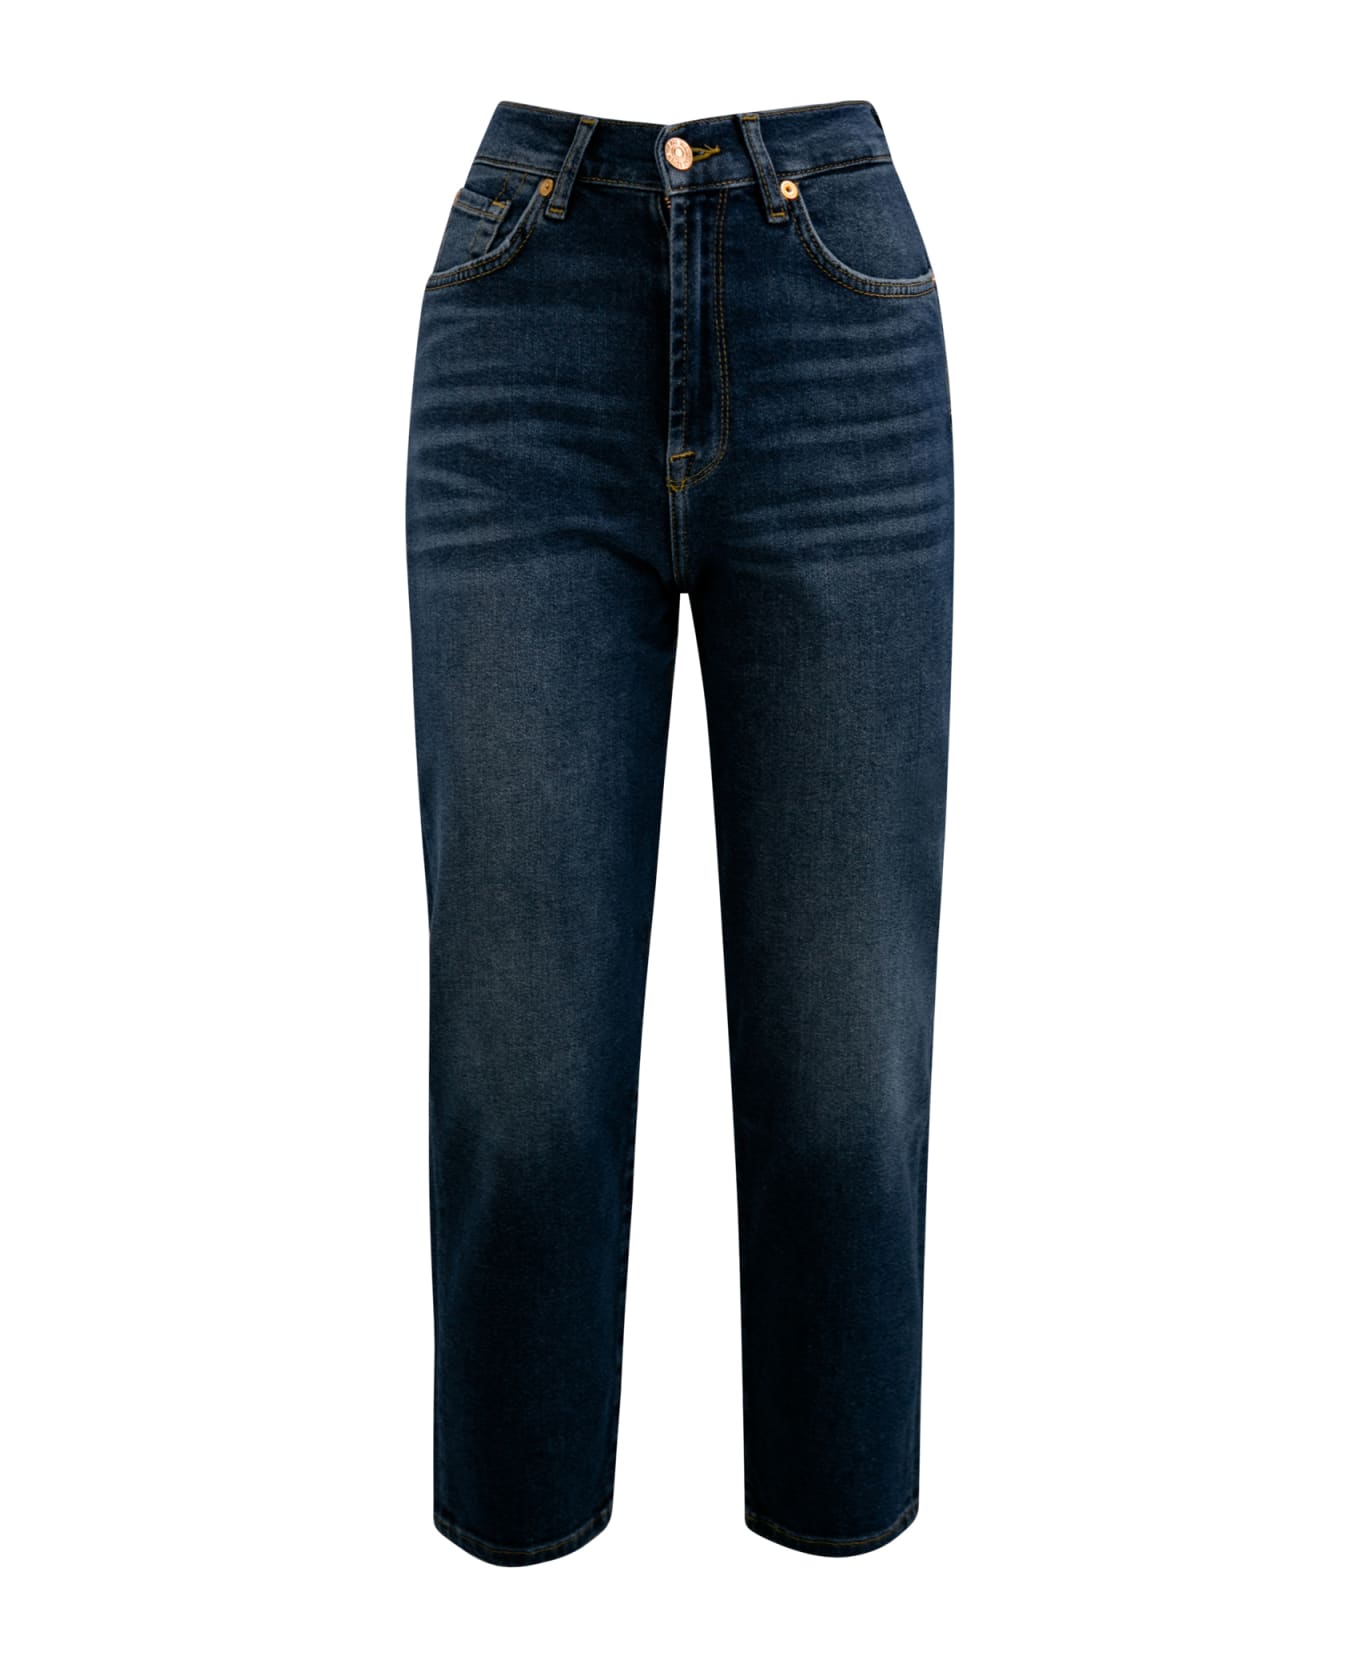 7 For All Mankind Malia High-rise Cropped Jeans